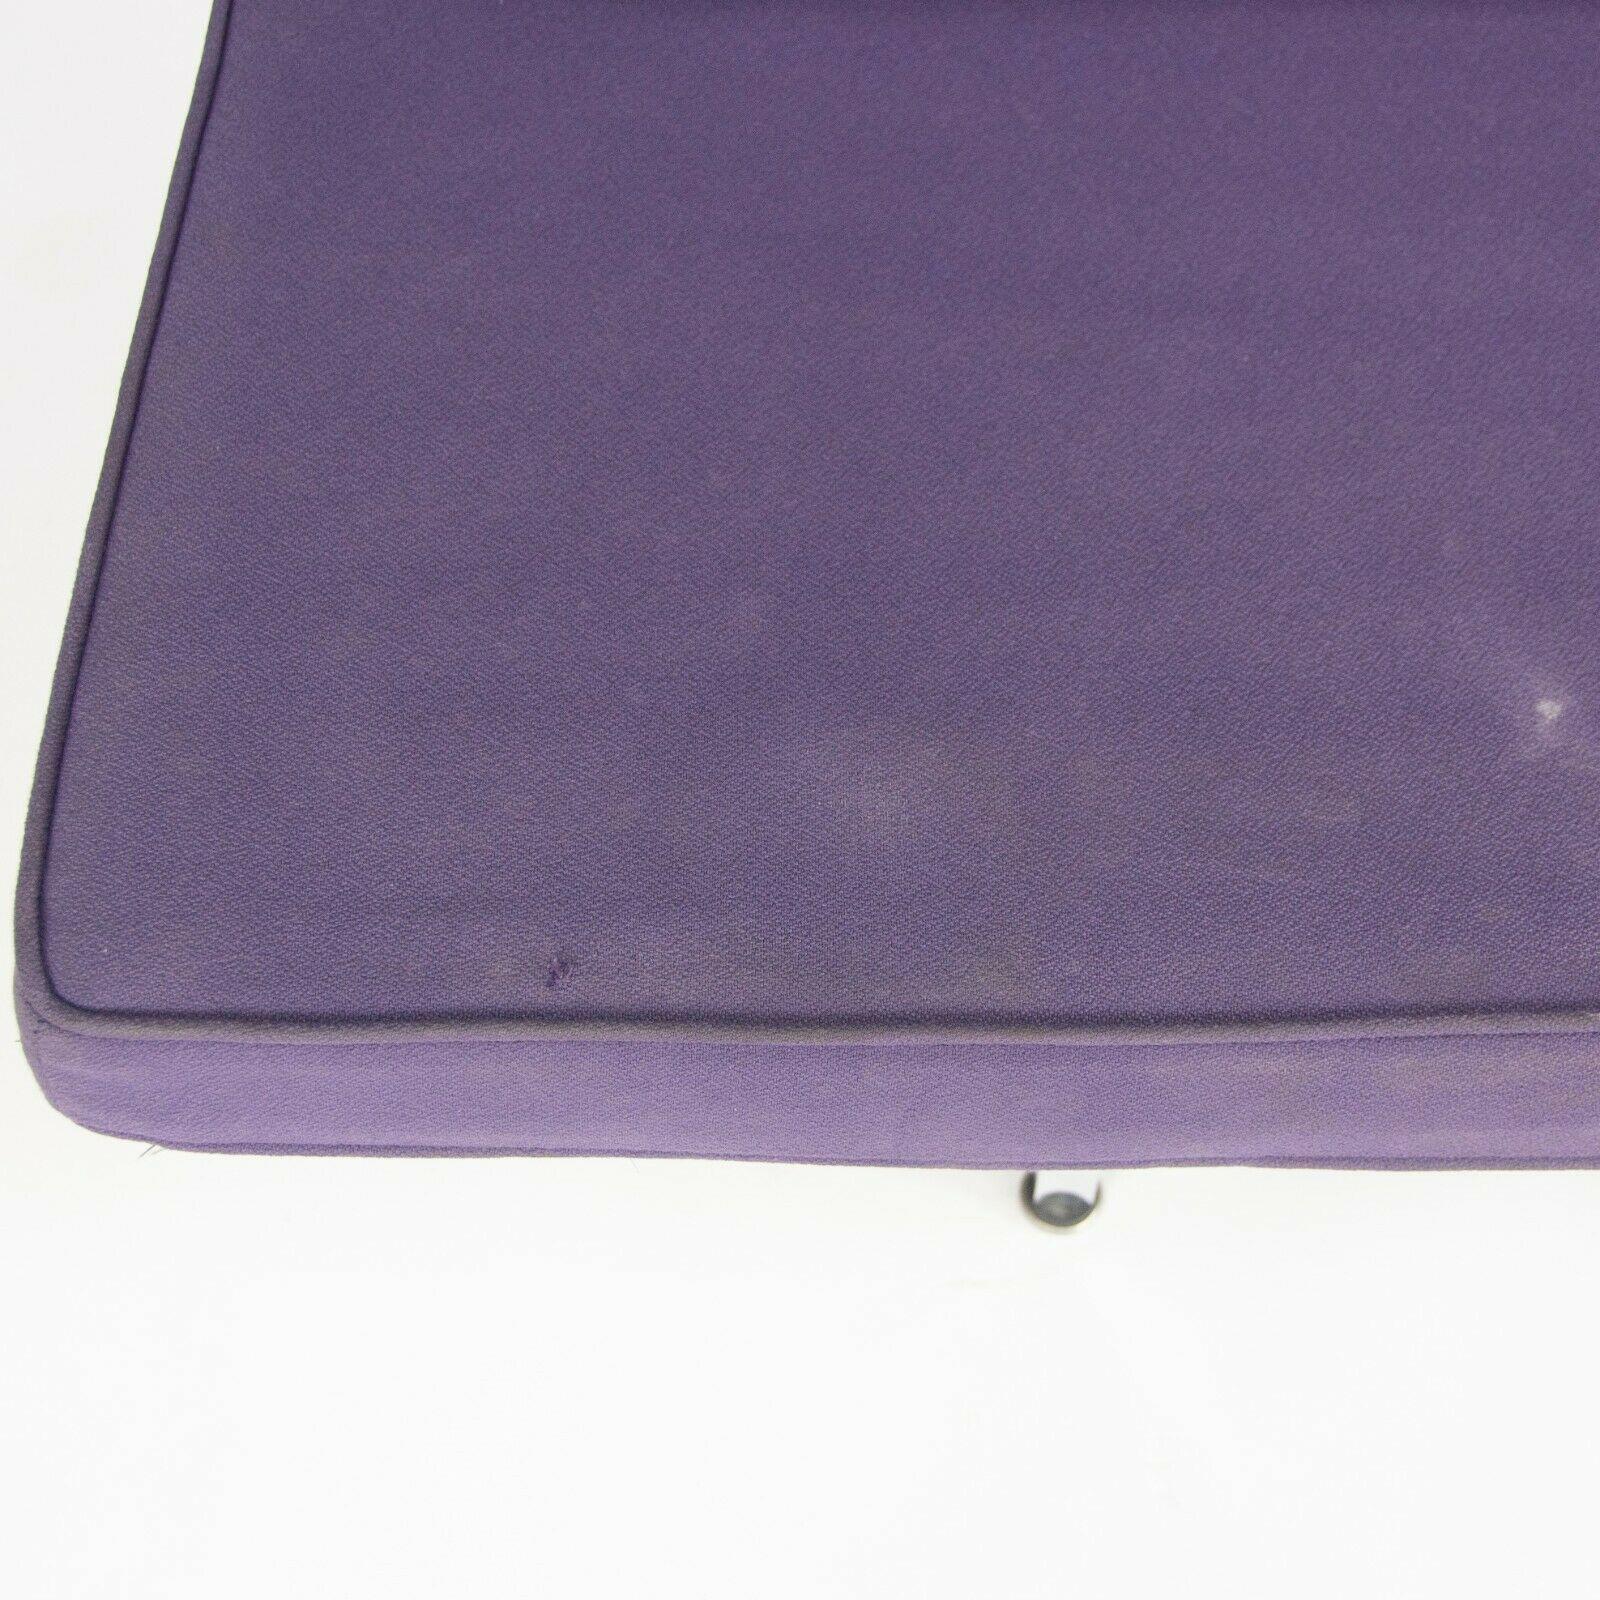 2006 Herman Miller Ray and Charles Eames Sofa Compact Purple Fabric Upholstery For Sale 1